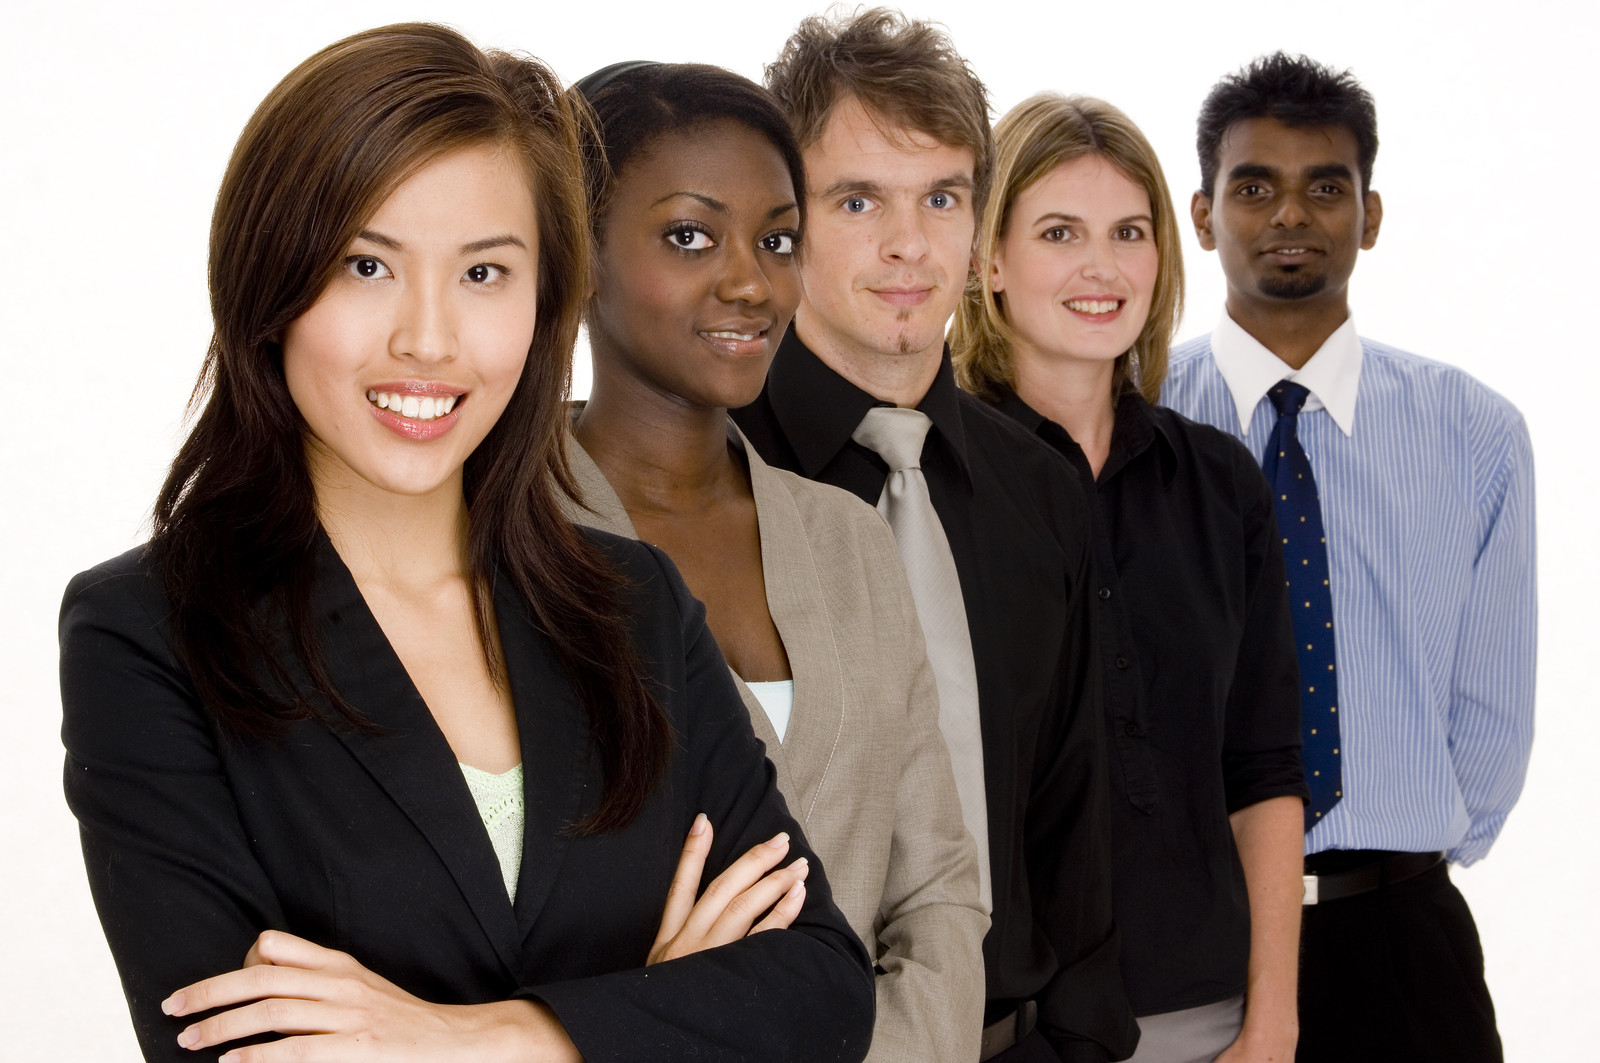 Employees from different ethnic backgrounds.